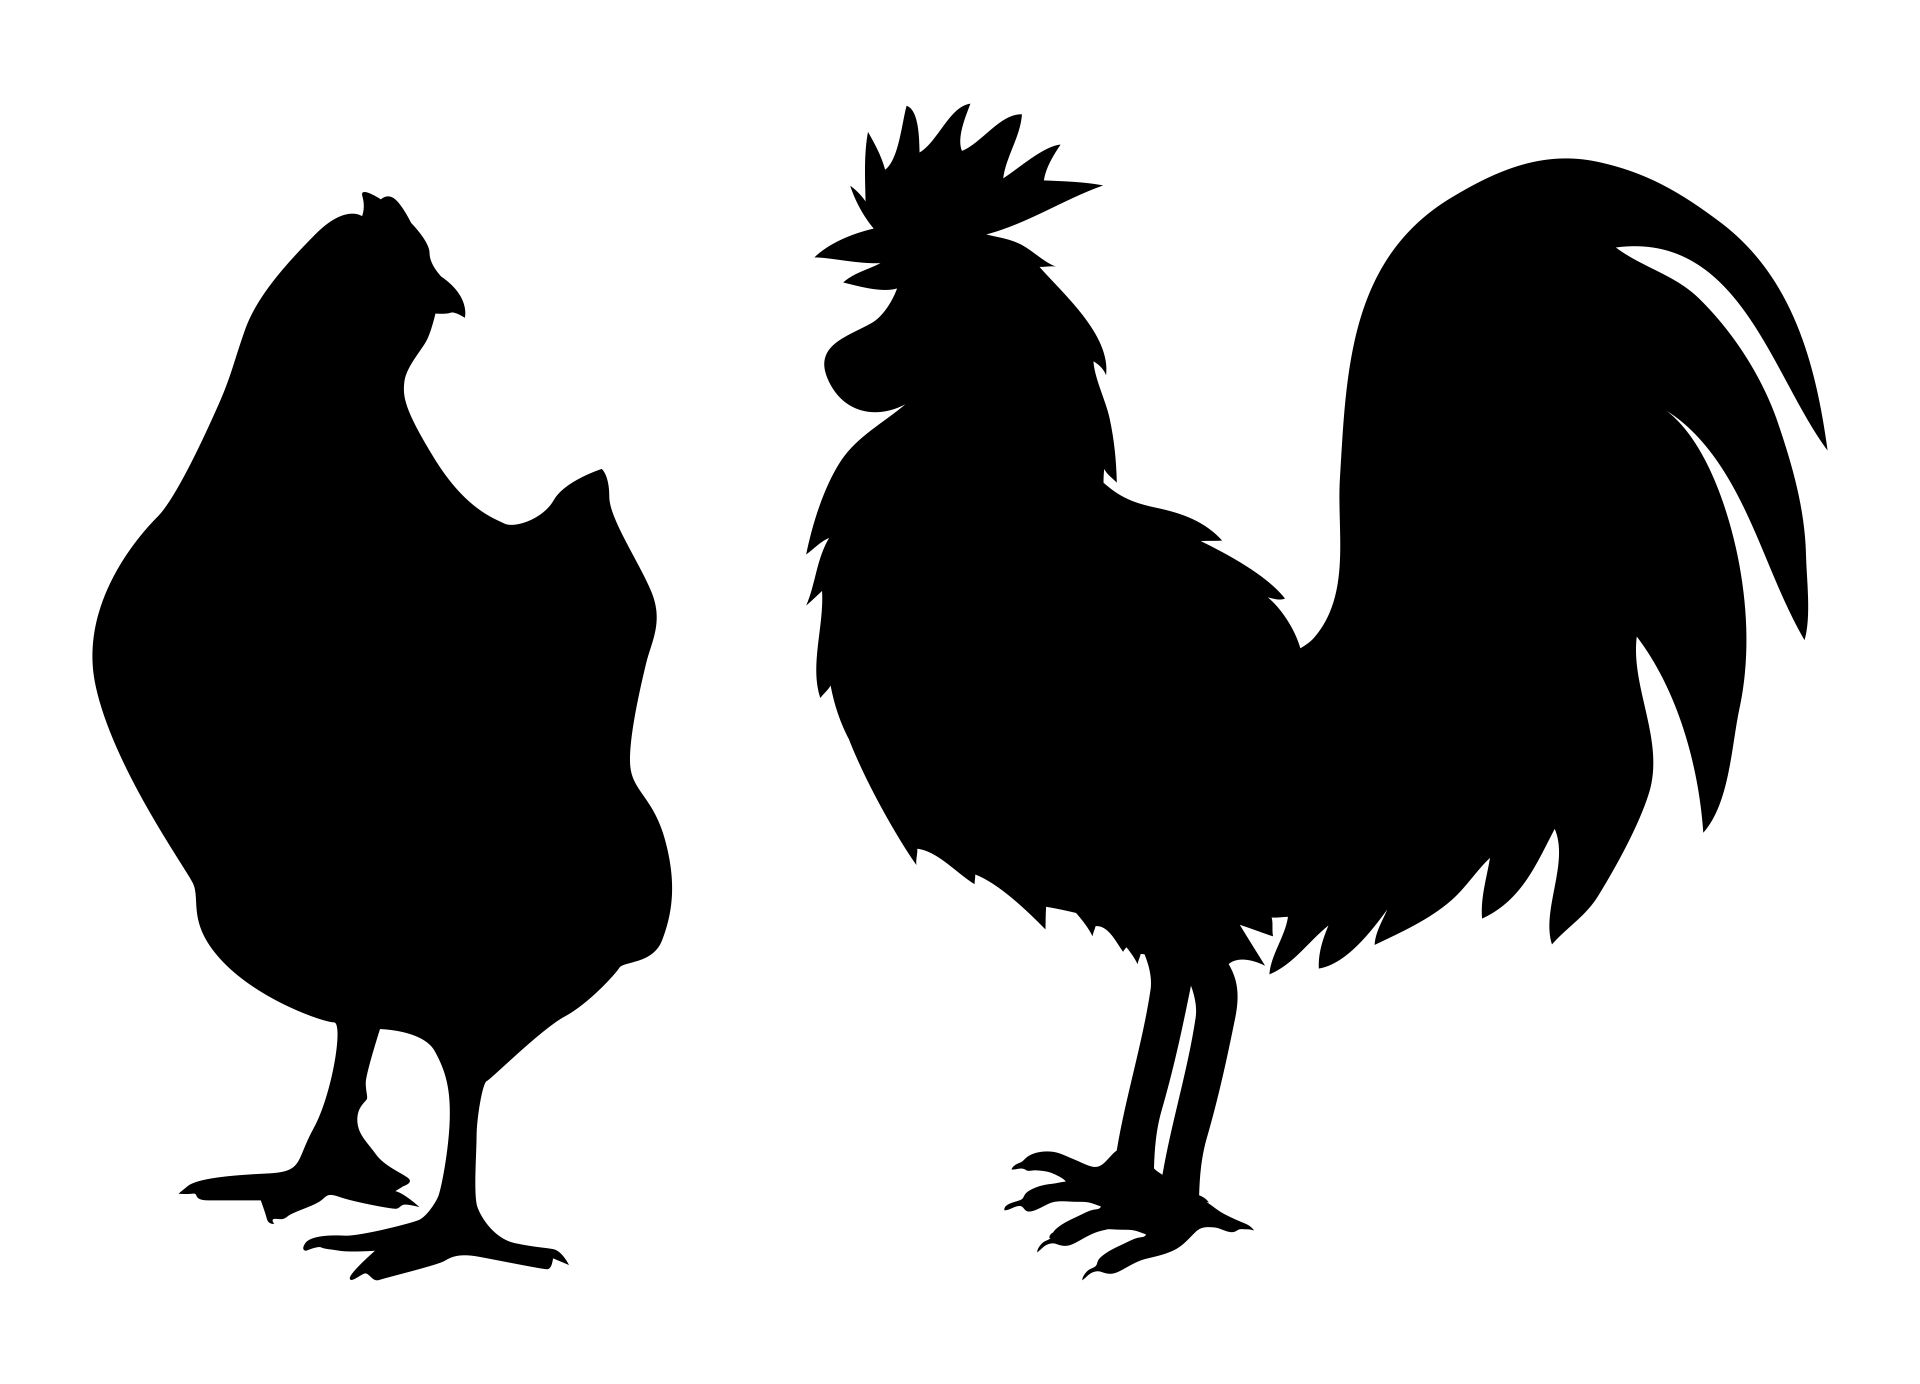 Chicken and Rooster Stencils